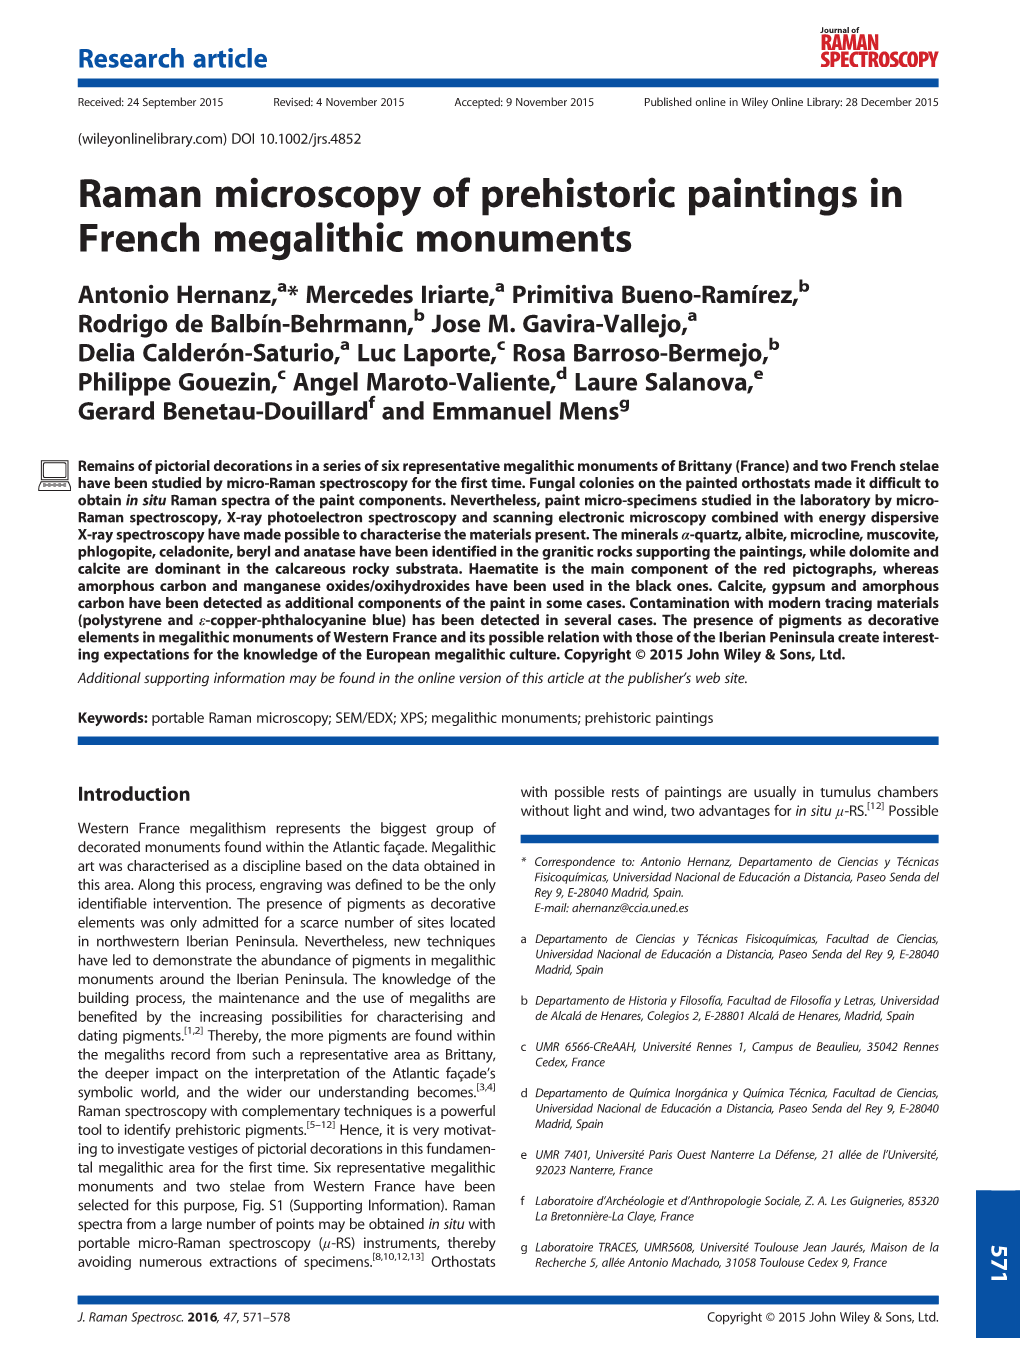 Raman Microscopy of Prehistoric Paintings in French Megalithic